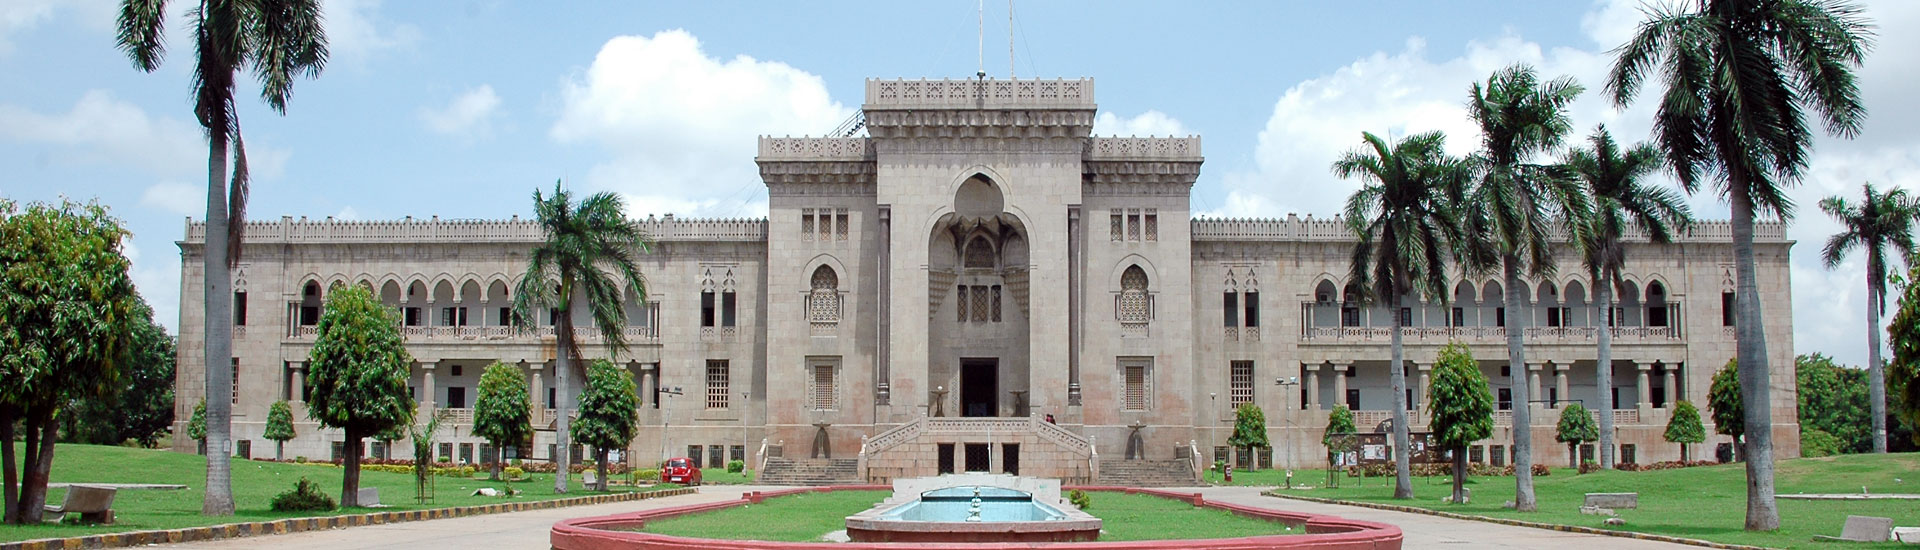 University College of Arts and Social Sciecnce, Hyderabad Image